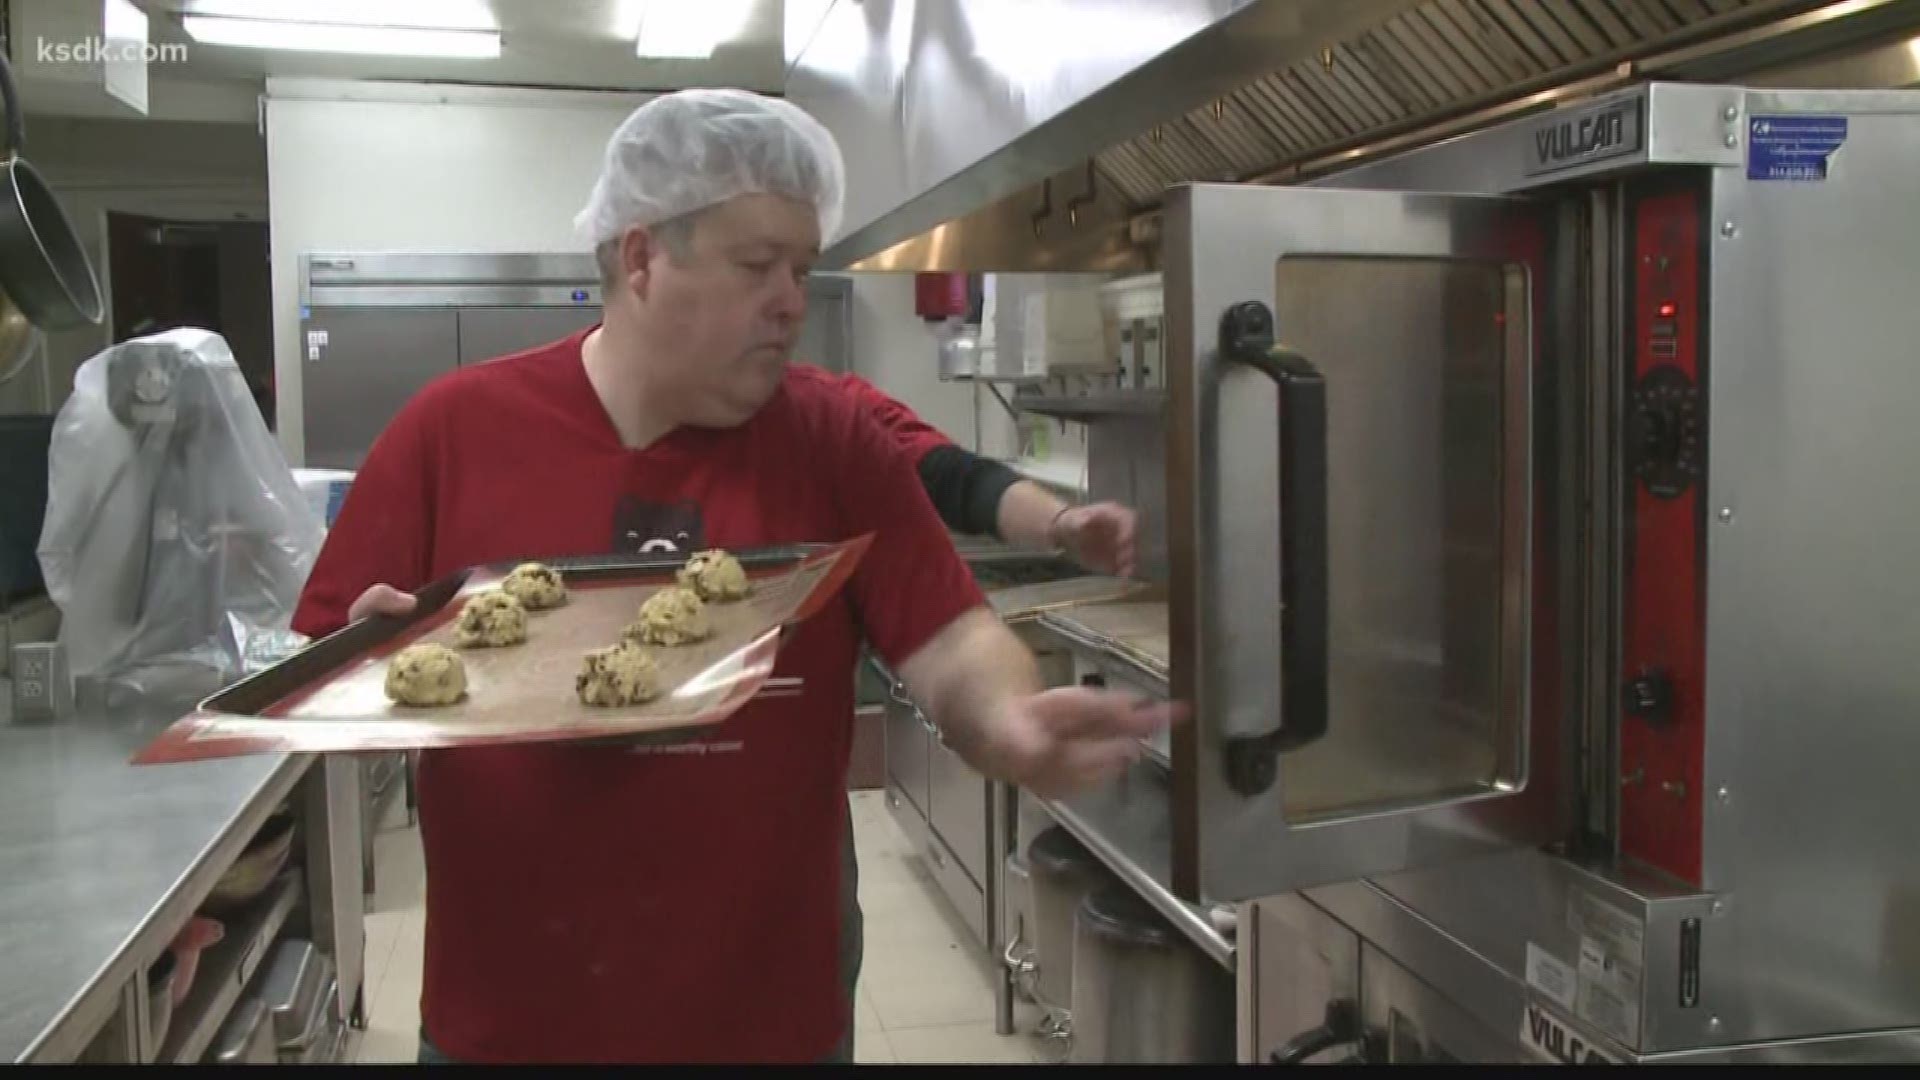 Laughing Bear Bakery gives jobs to ex-cons and helping them turn their life around.